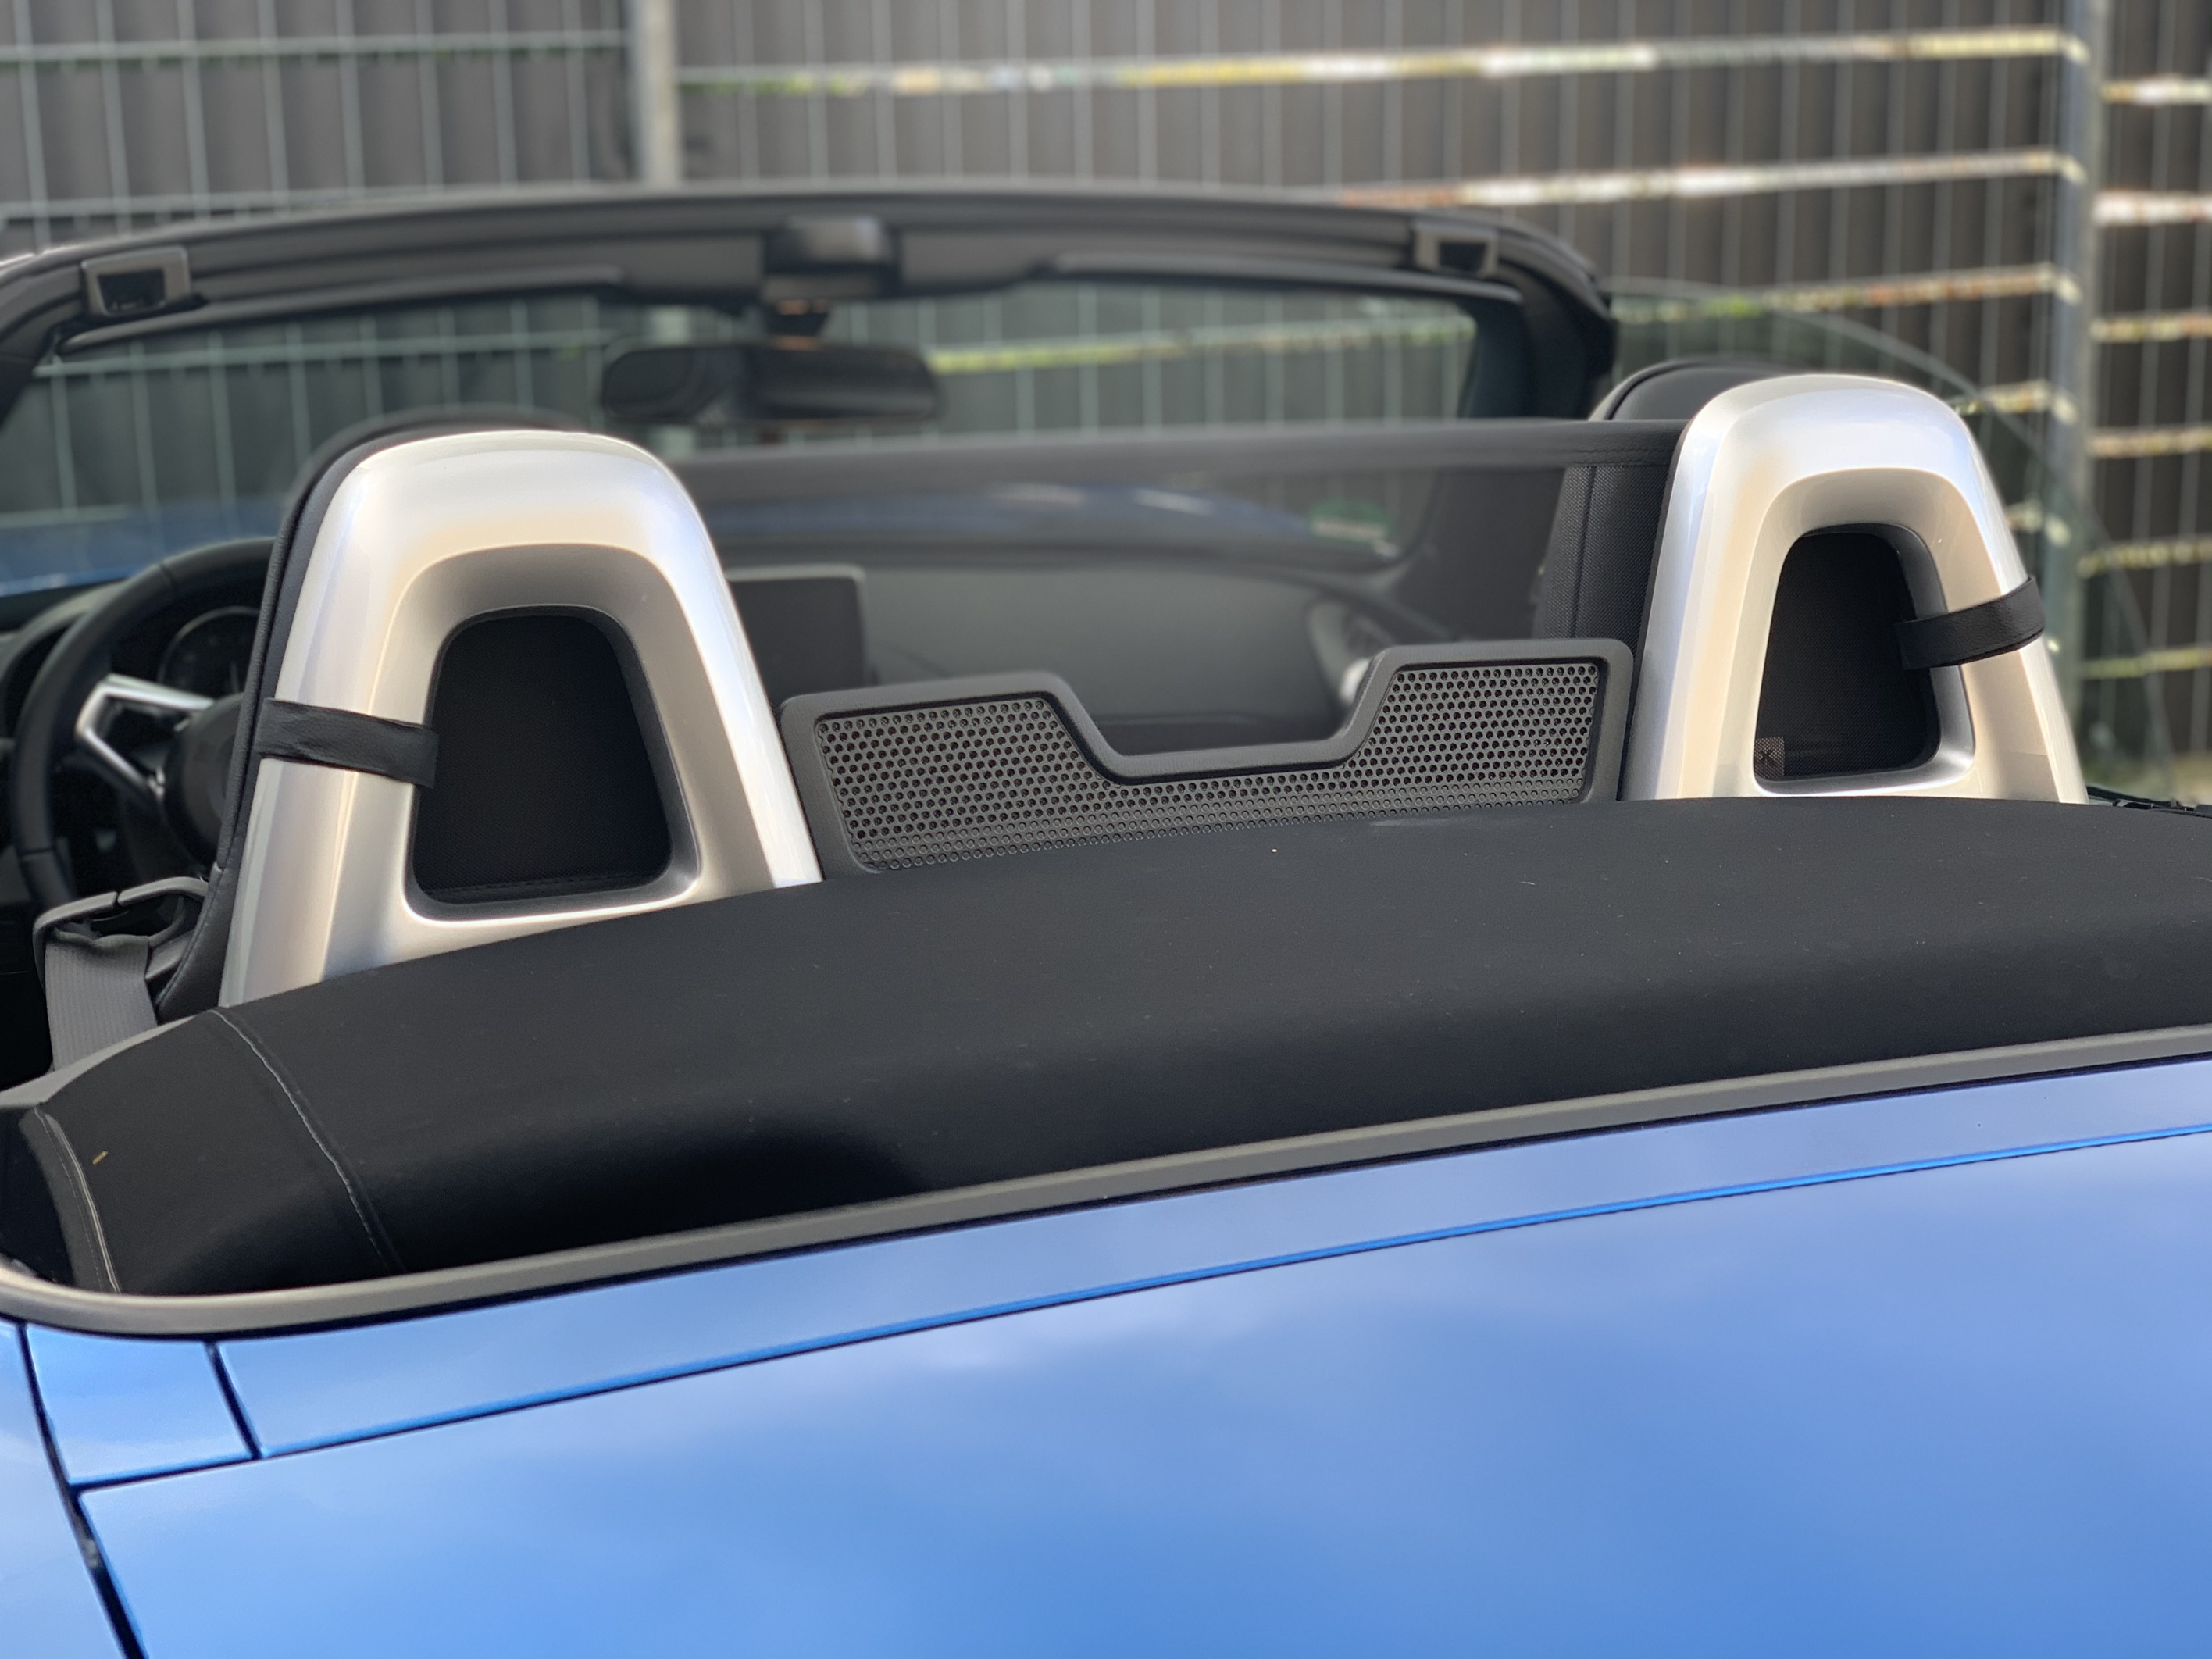 AIRAX wind deflector for Fiat 124 Spider (348) steel frame with net in black